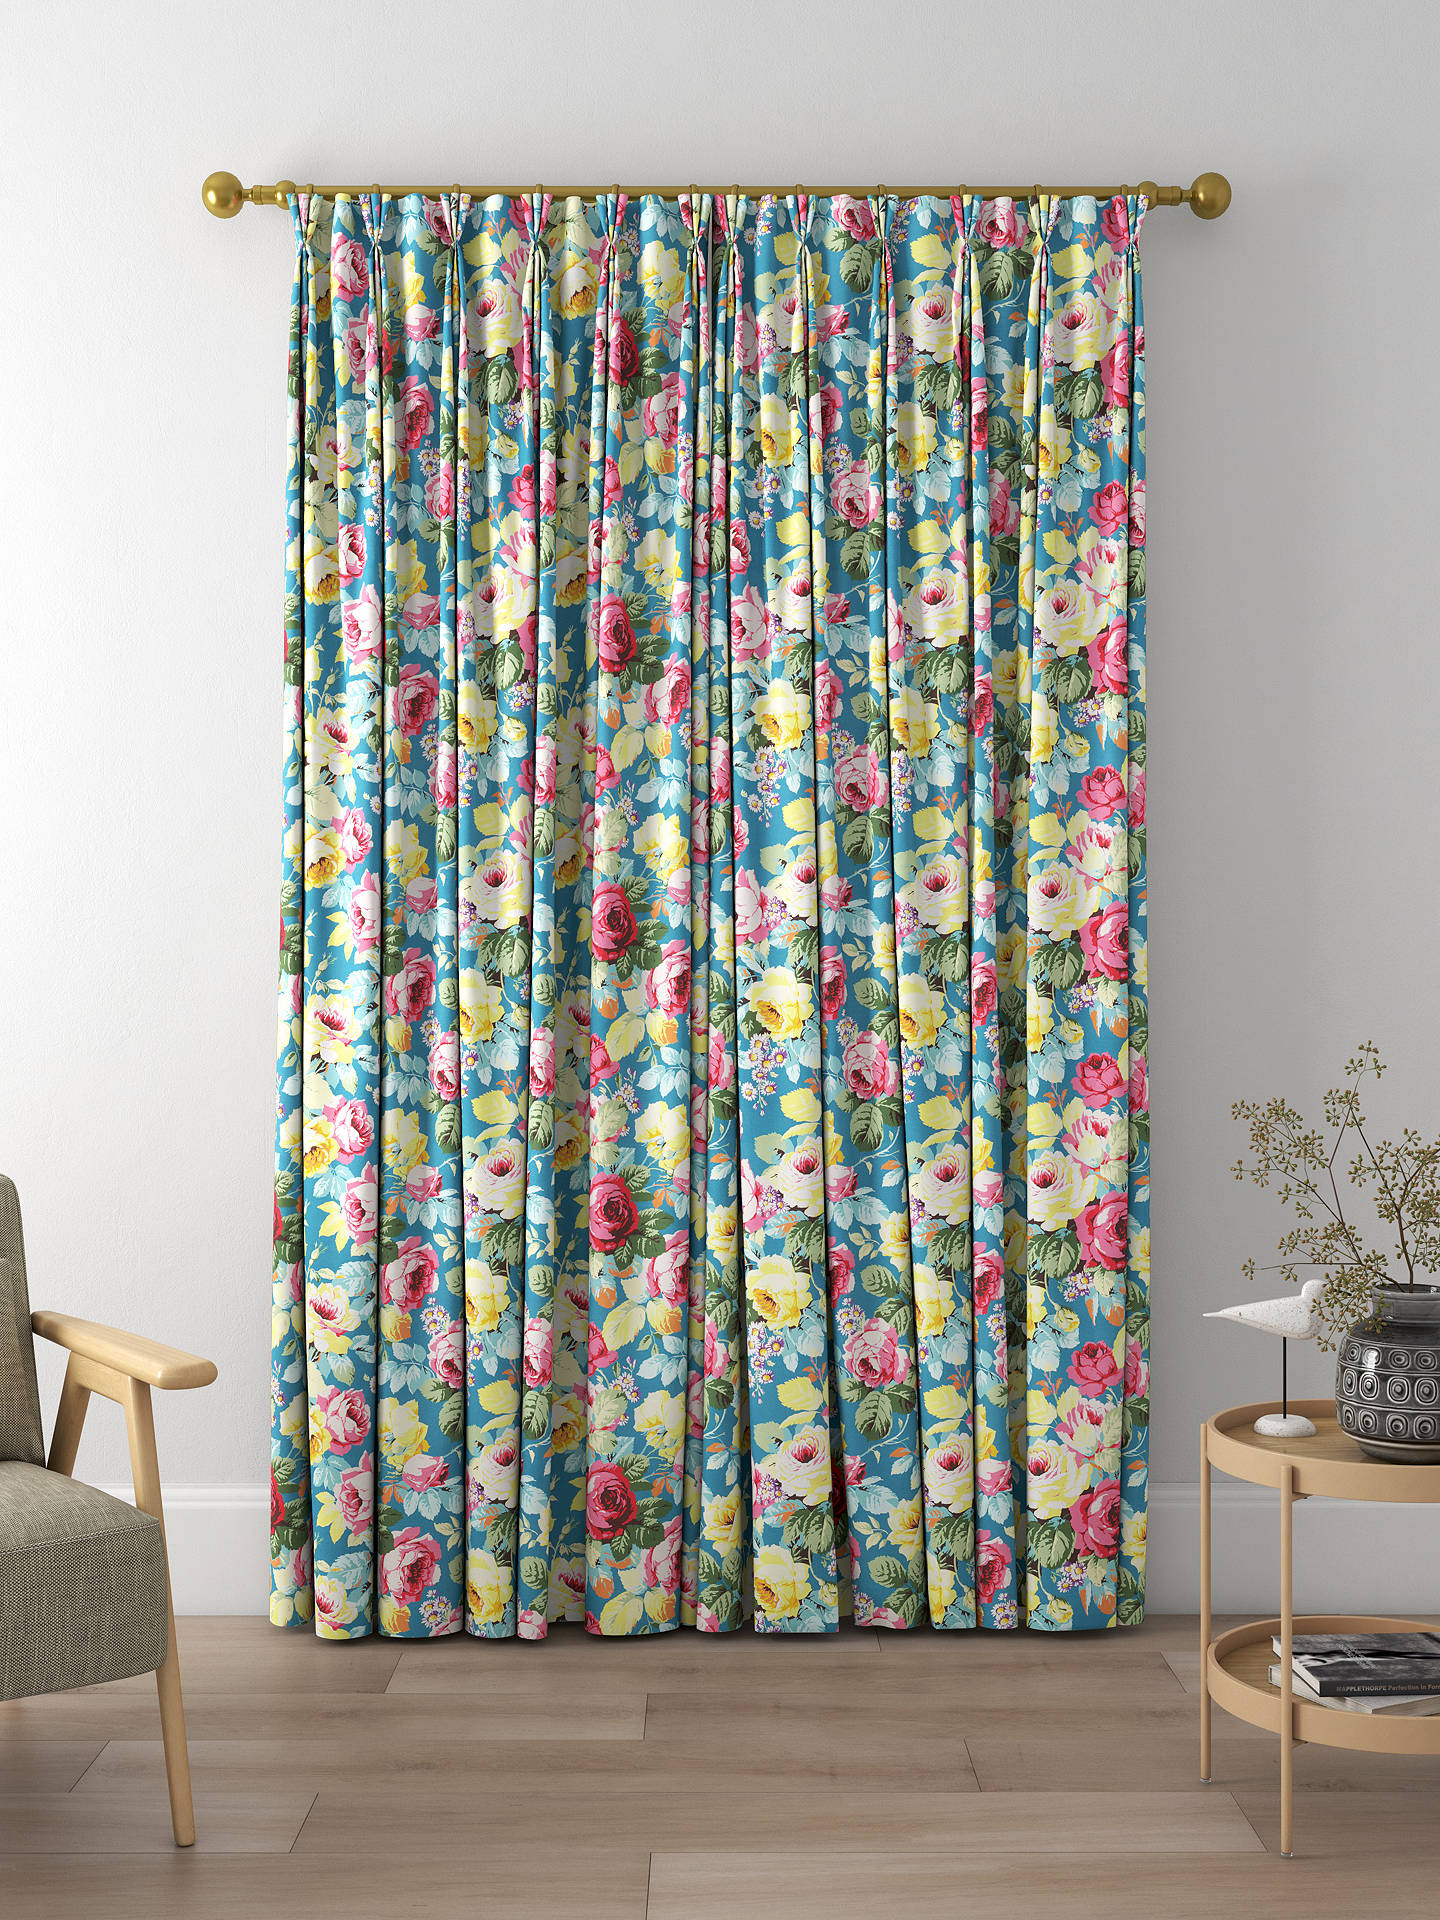 Sanderson Chelsea Made to Measure Curtains, Multi